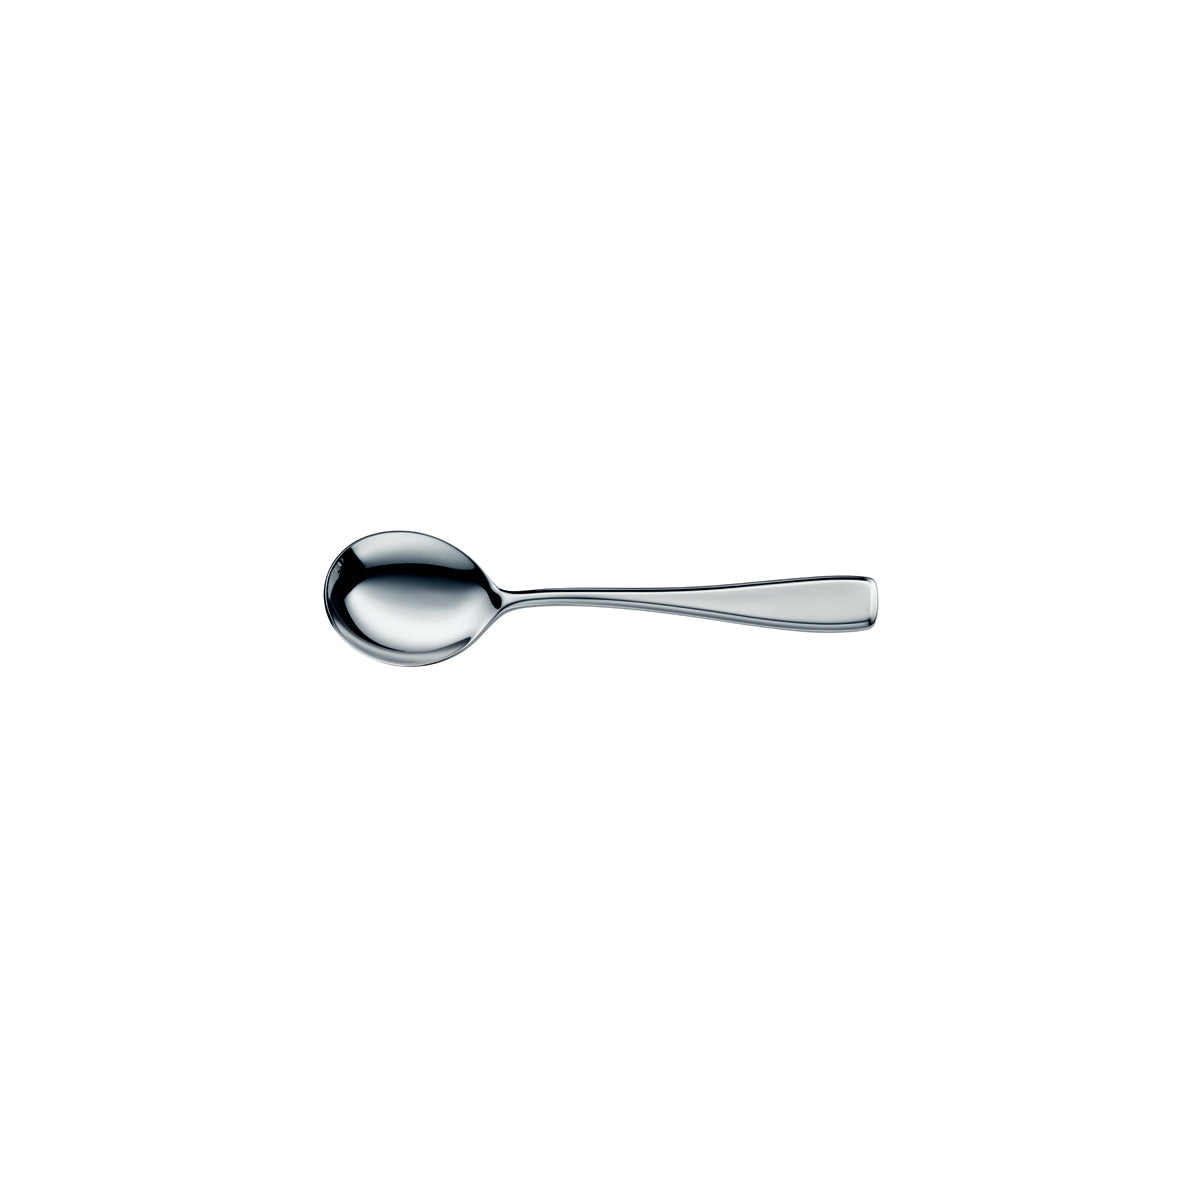 12.7989.6040 WMF Solid Soup Spoon Stainless Steel Tomkin Australia Hospitality Supplies